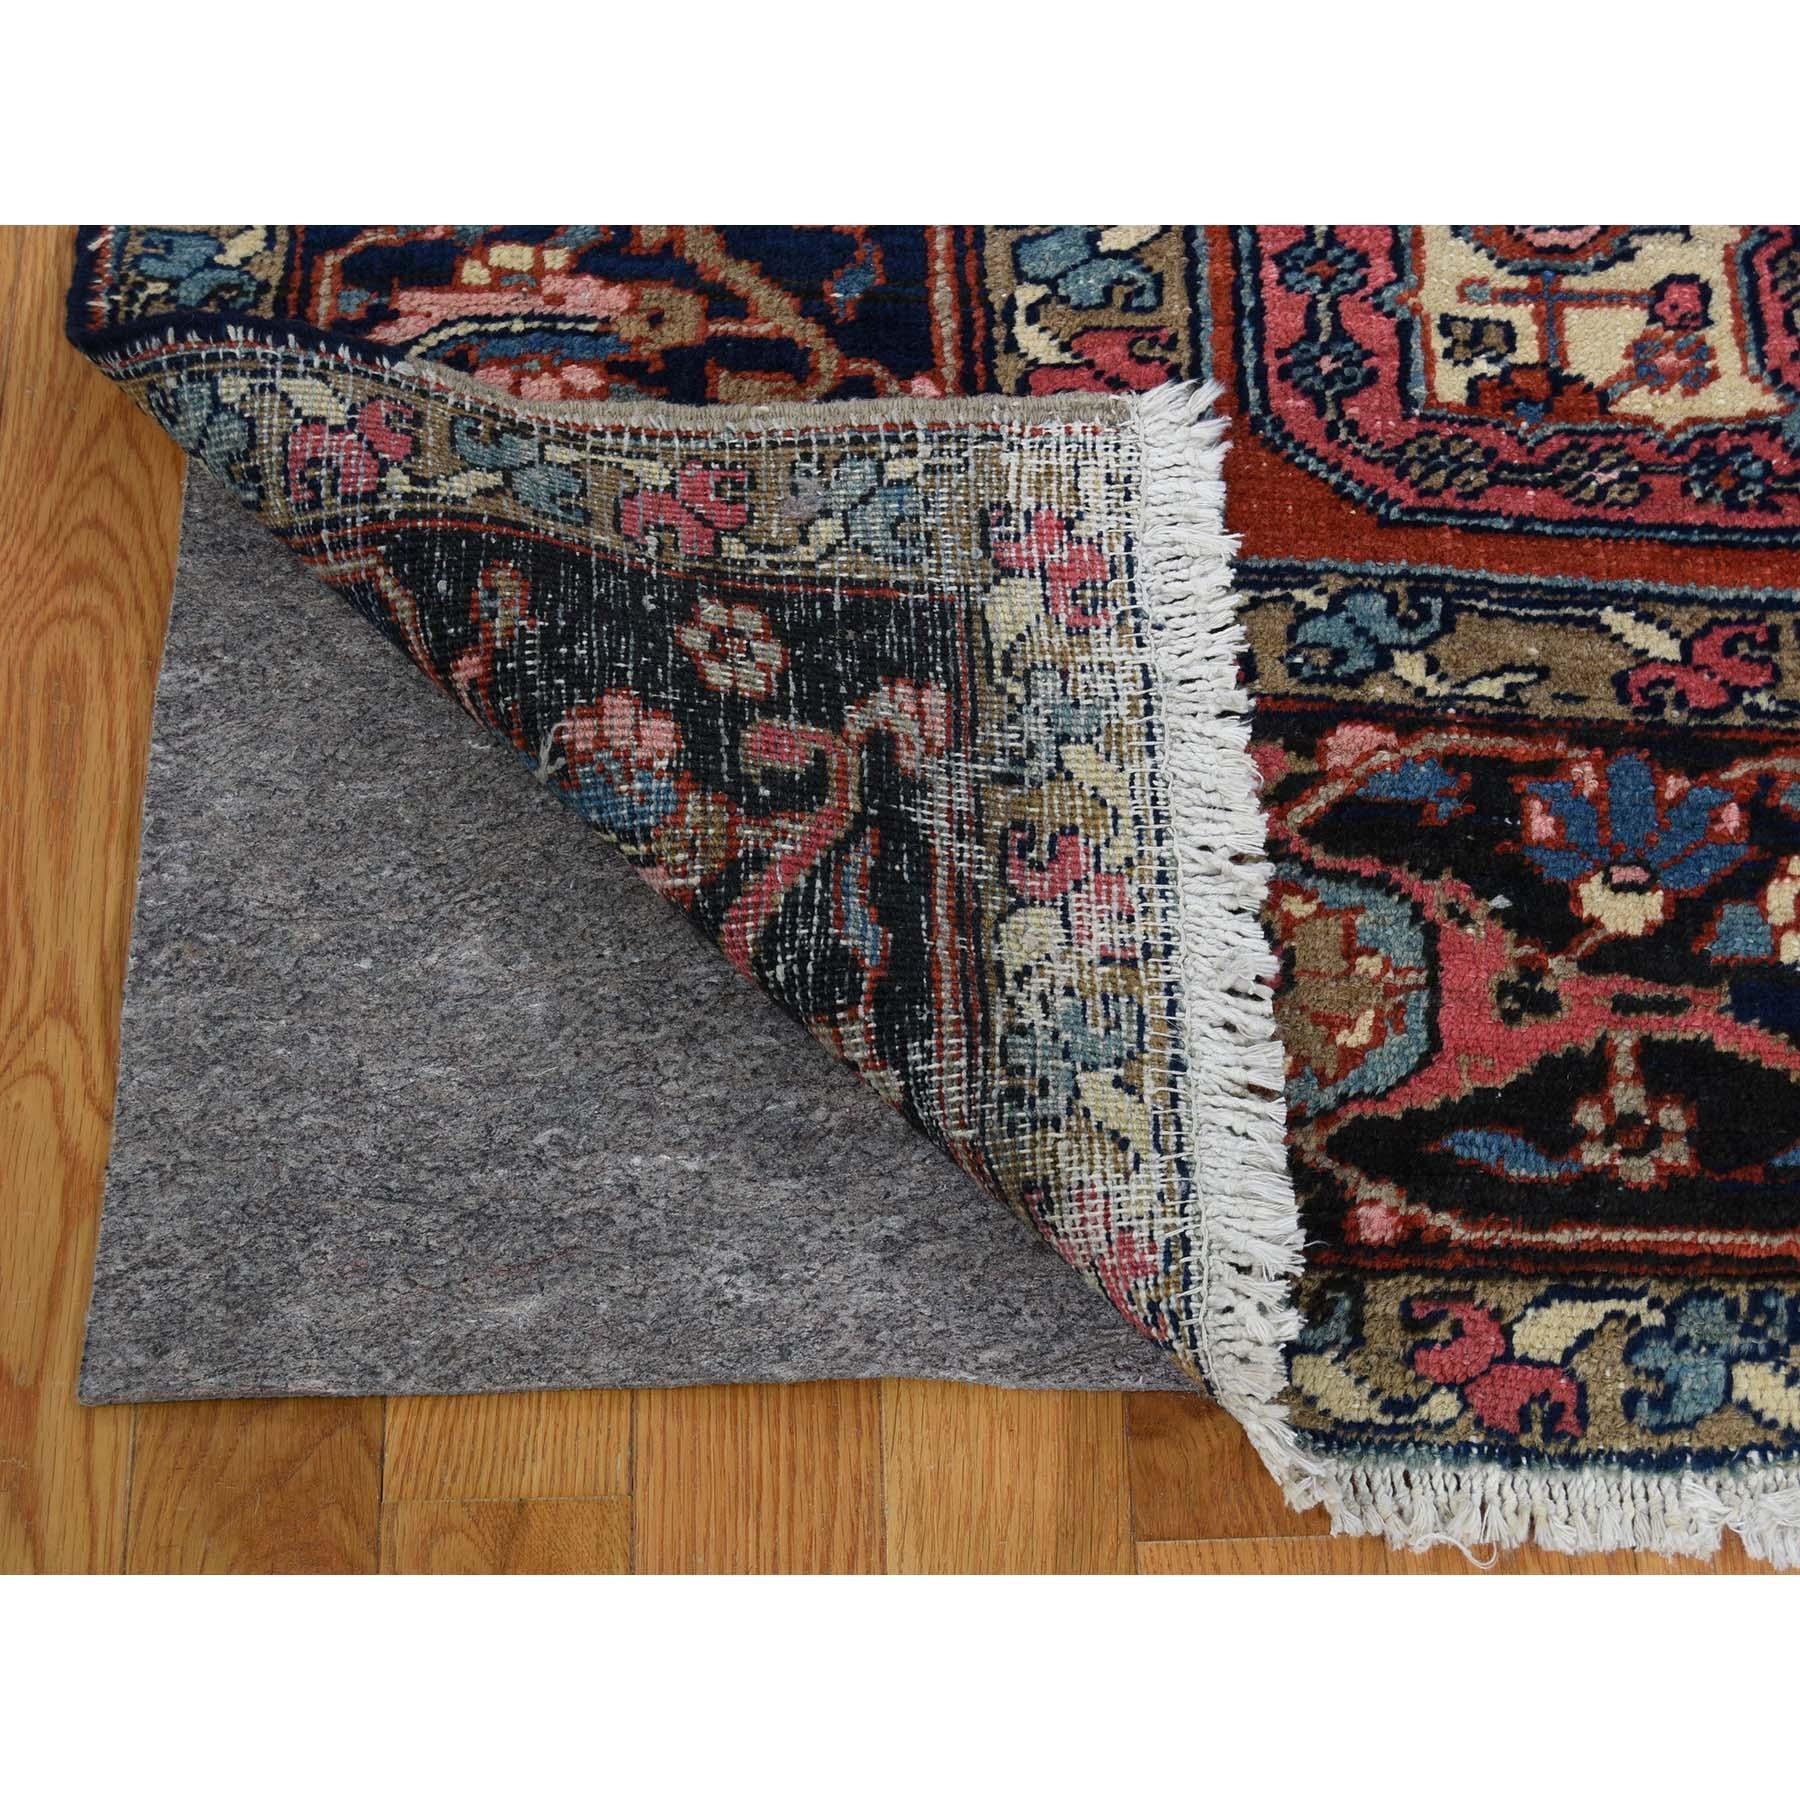 20th Century Antique Persian Heriz Good Condition Flower Design Hand-Knotted Oriental Rug